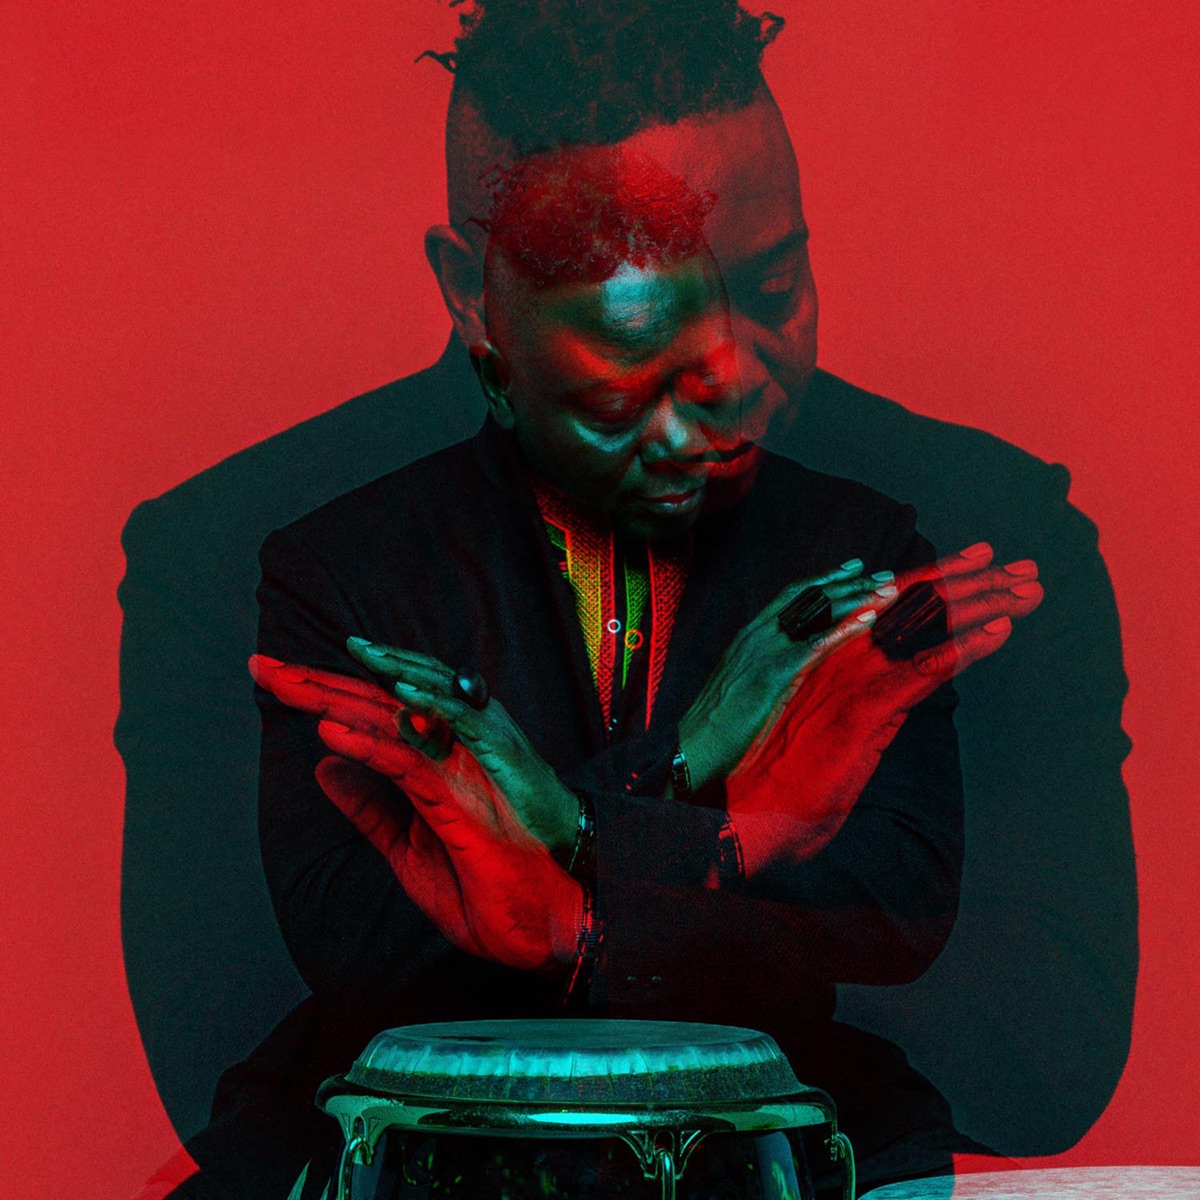 Chinese Wall - Album by Philip Bailey - Apple Music